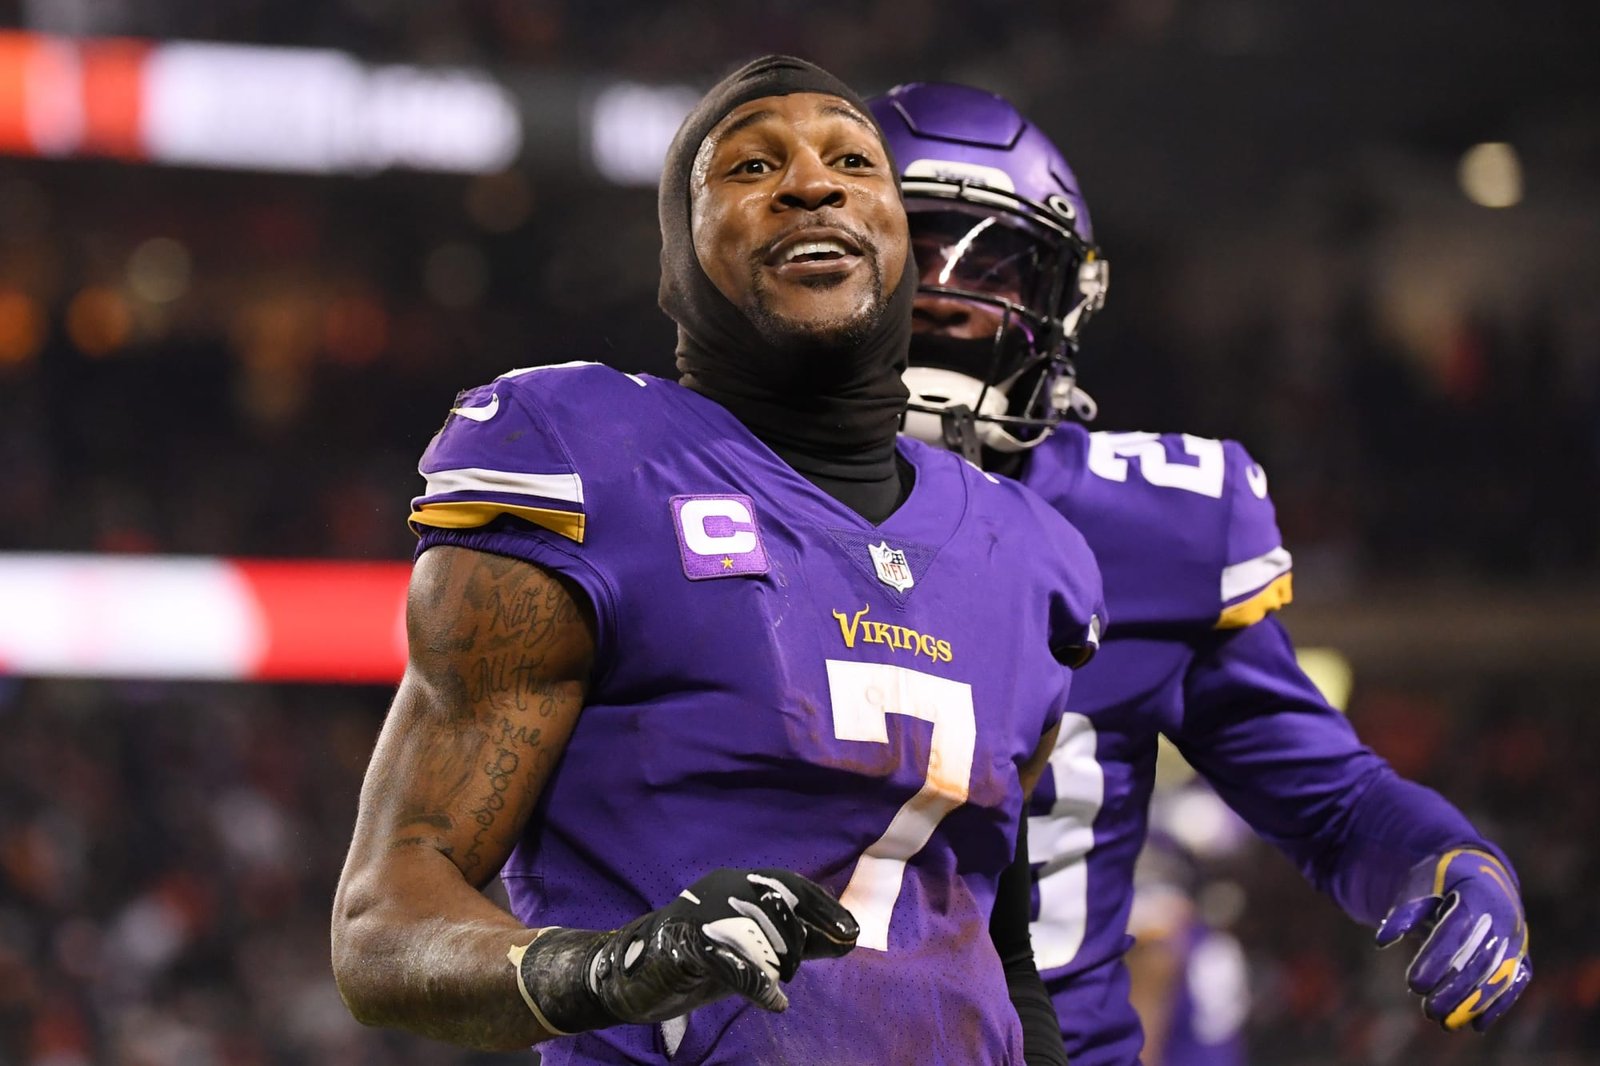 Vikings followers rejoice as Patrick Peterson declares he’s staying in Minnesota